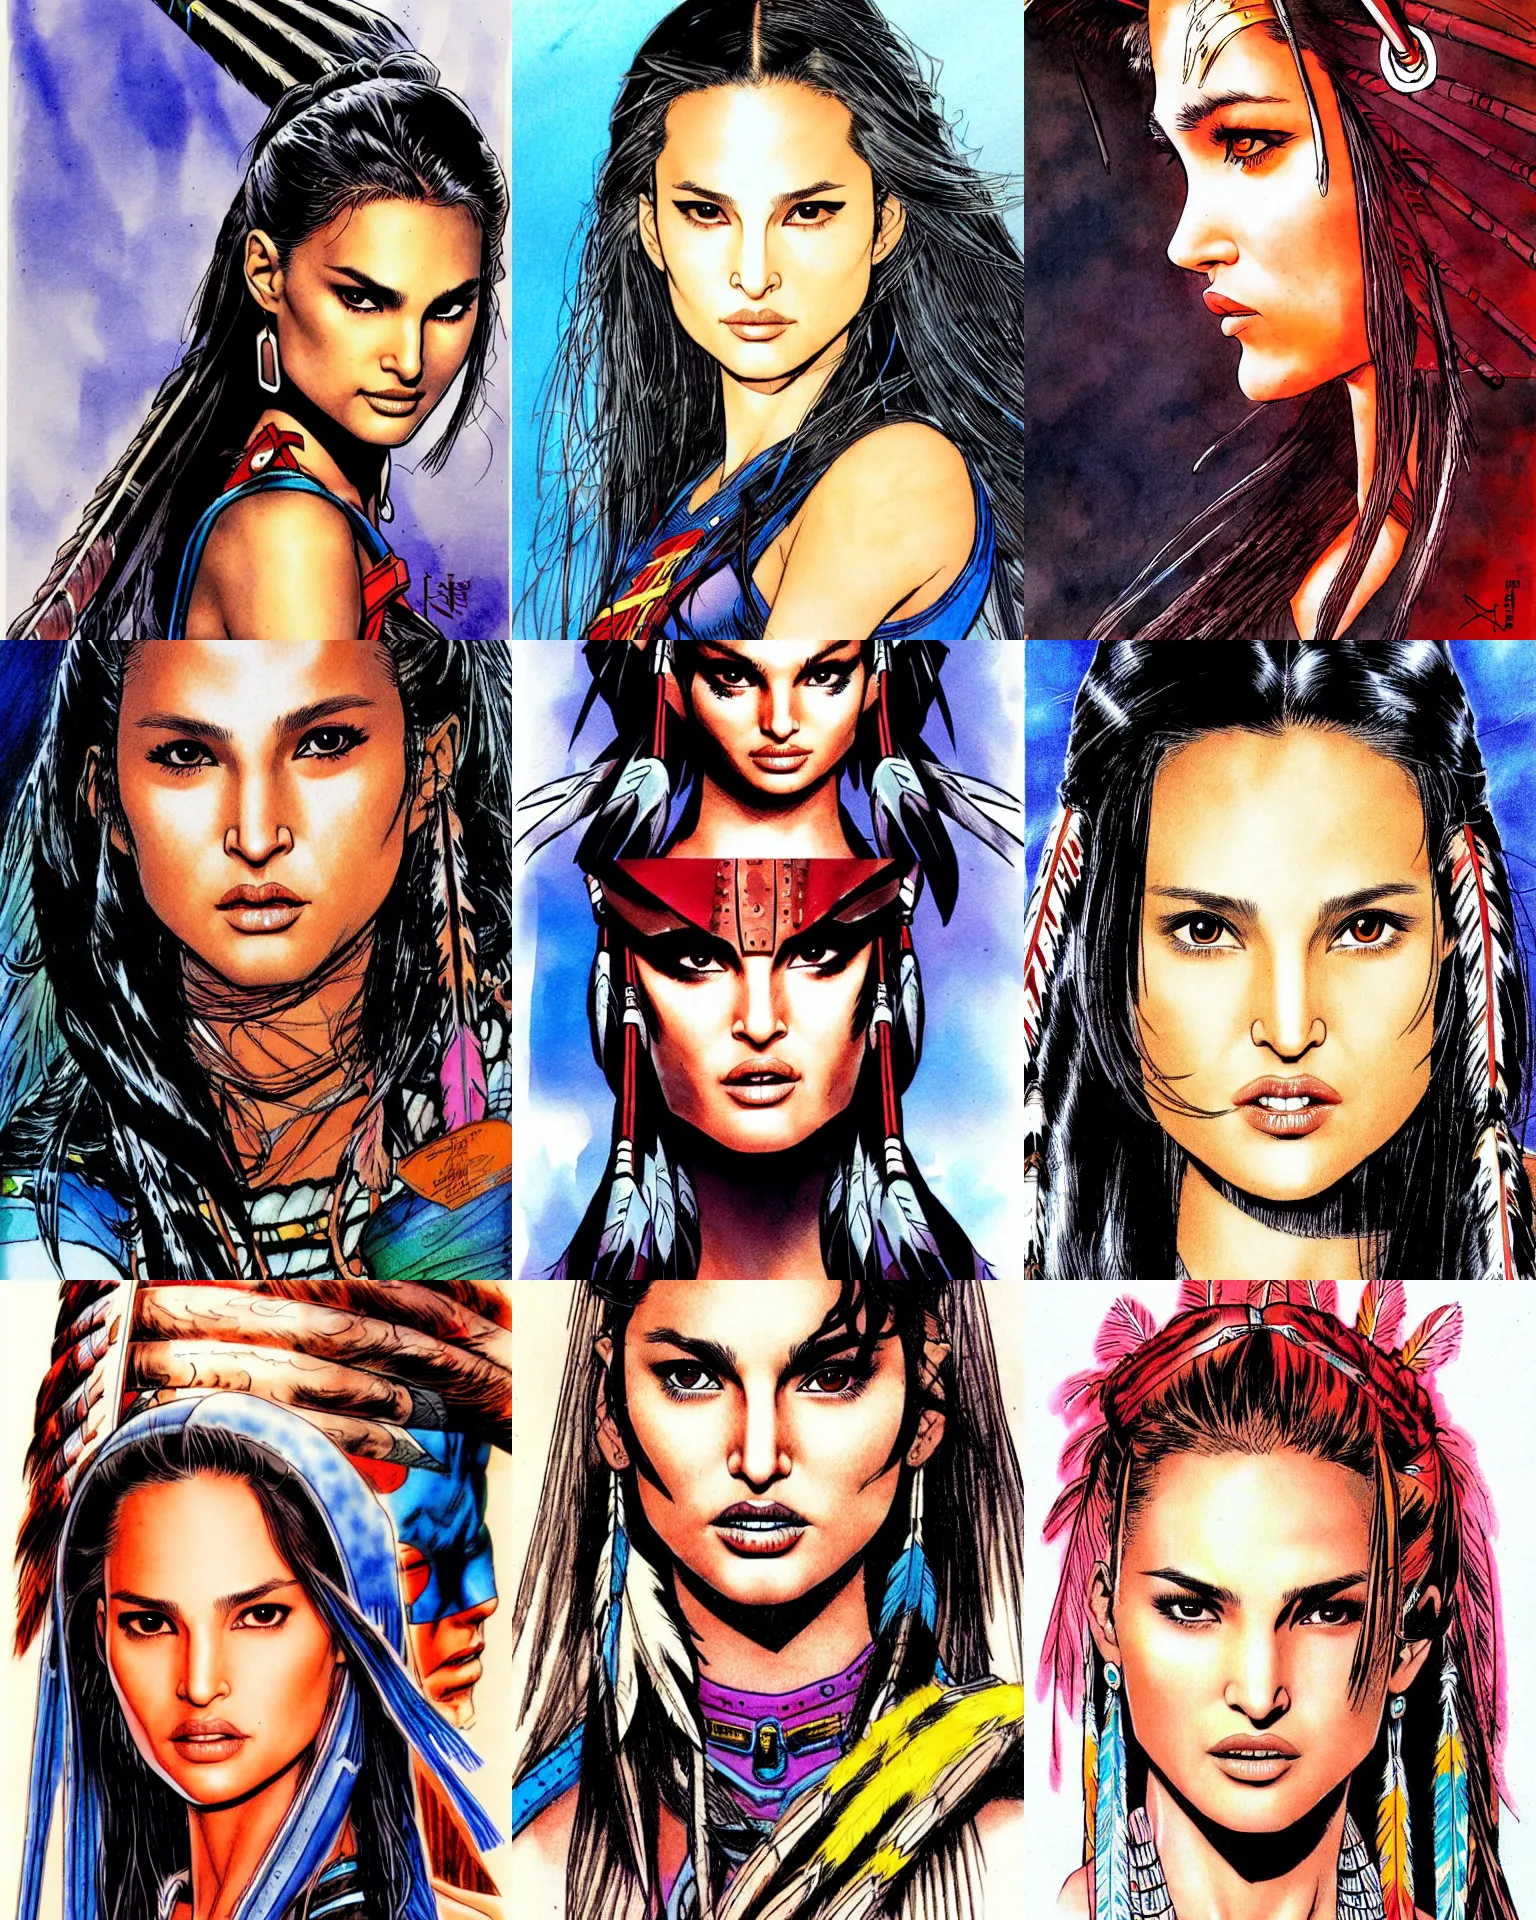 Prompt: jim lee!!! ink colorised airbrushed gouache sketch by jim lee close up headshot of native indian chinese natalie portman ( ( cindy crawford ) ) in the style of jim lee, x - men superhero comic book character by jim lee